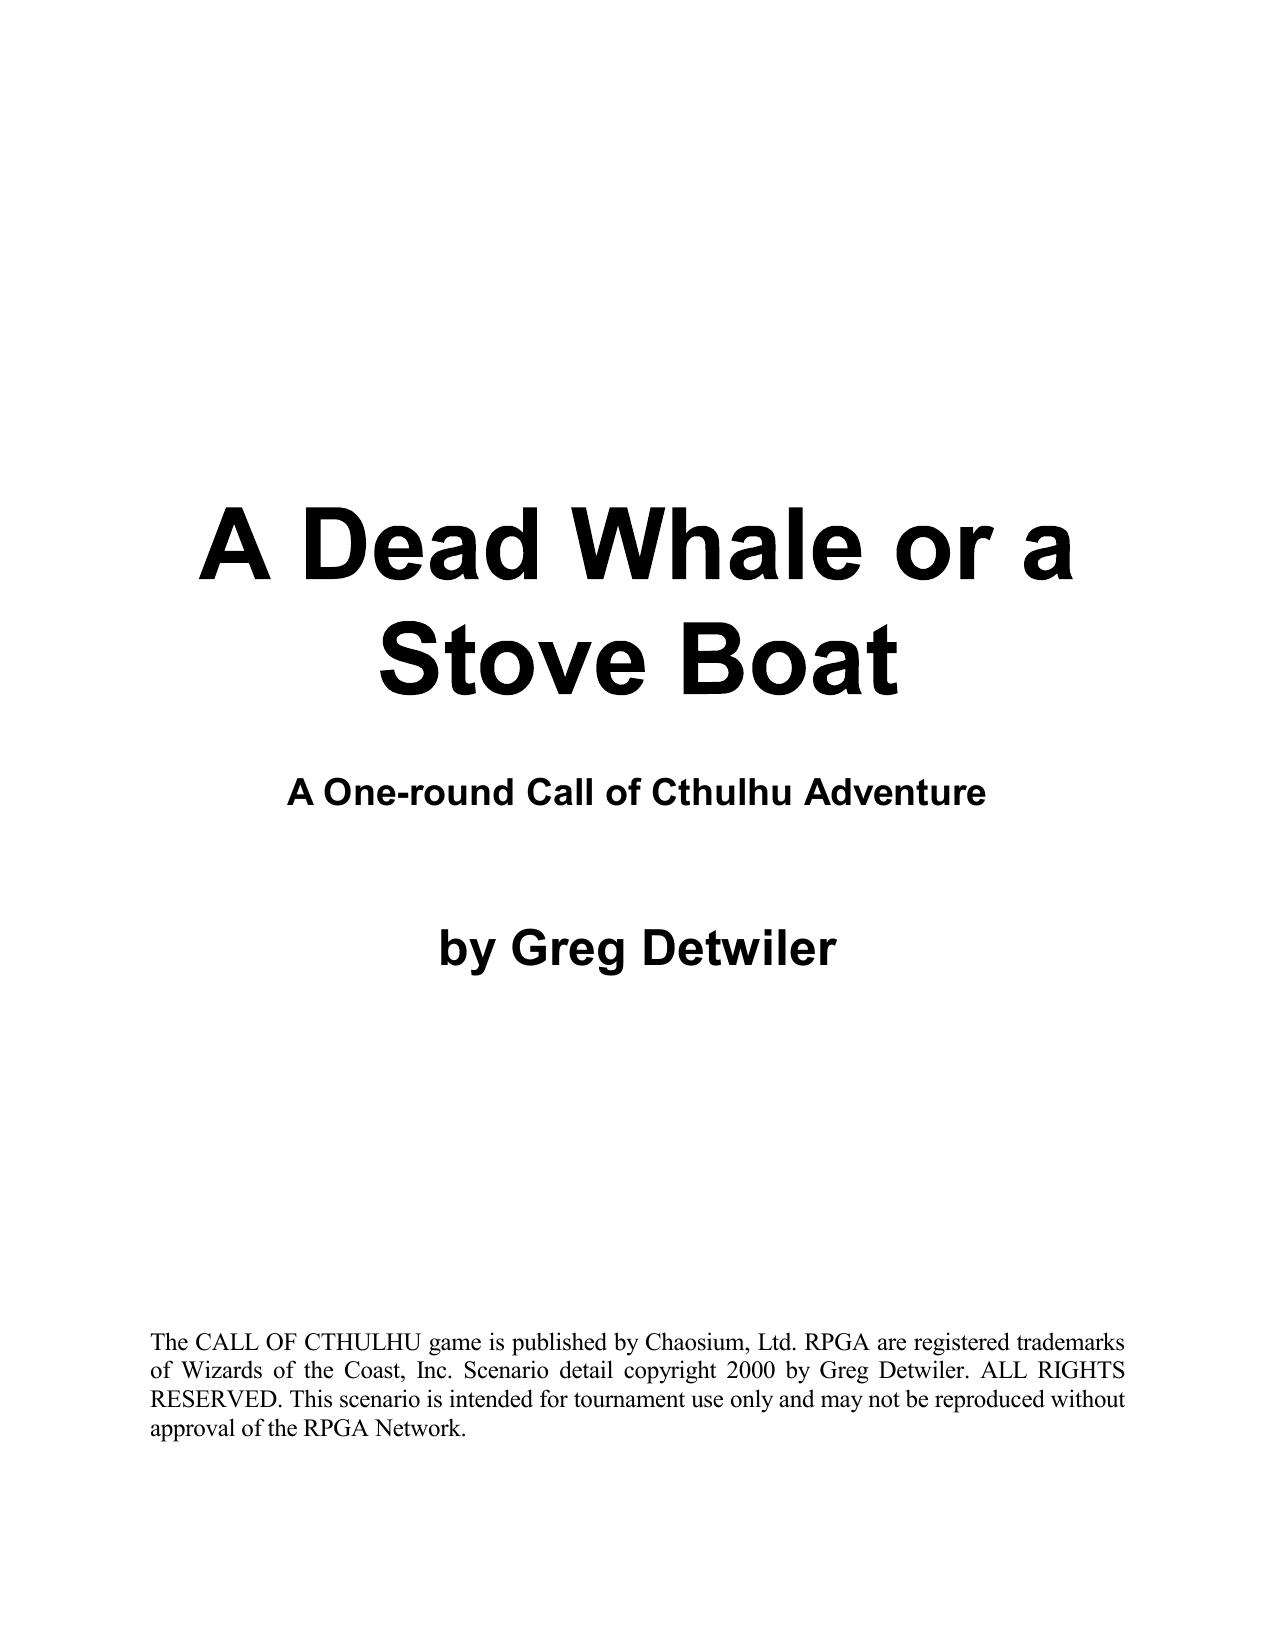 A Dead Whale or a stove boat